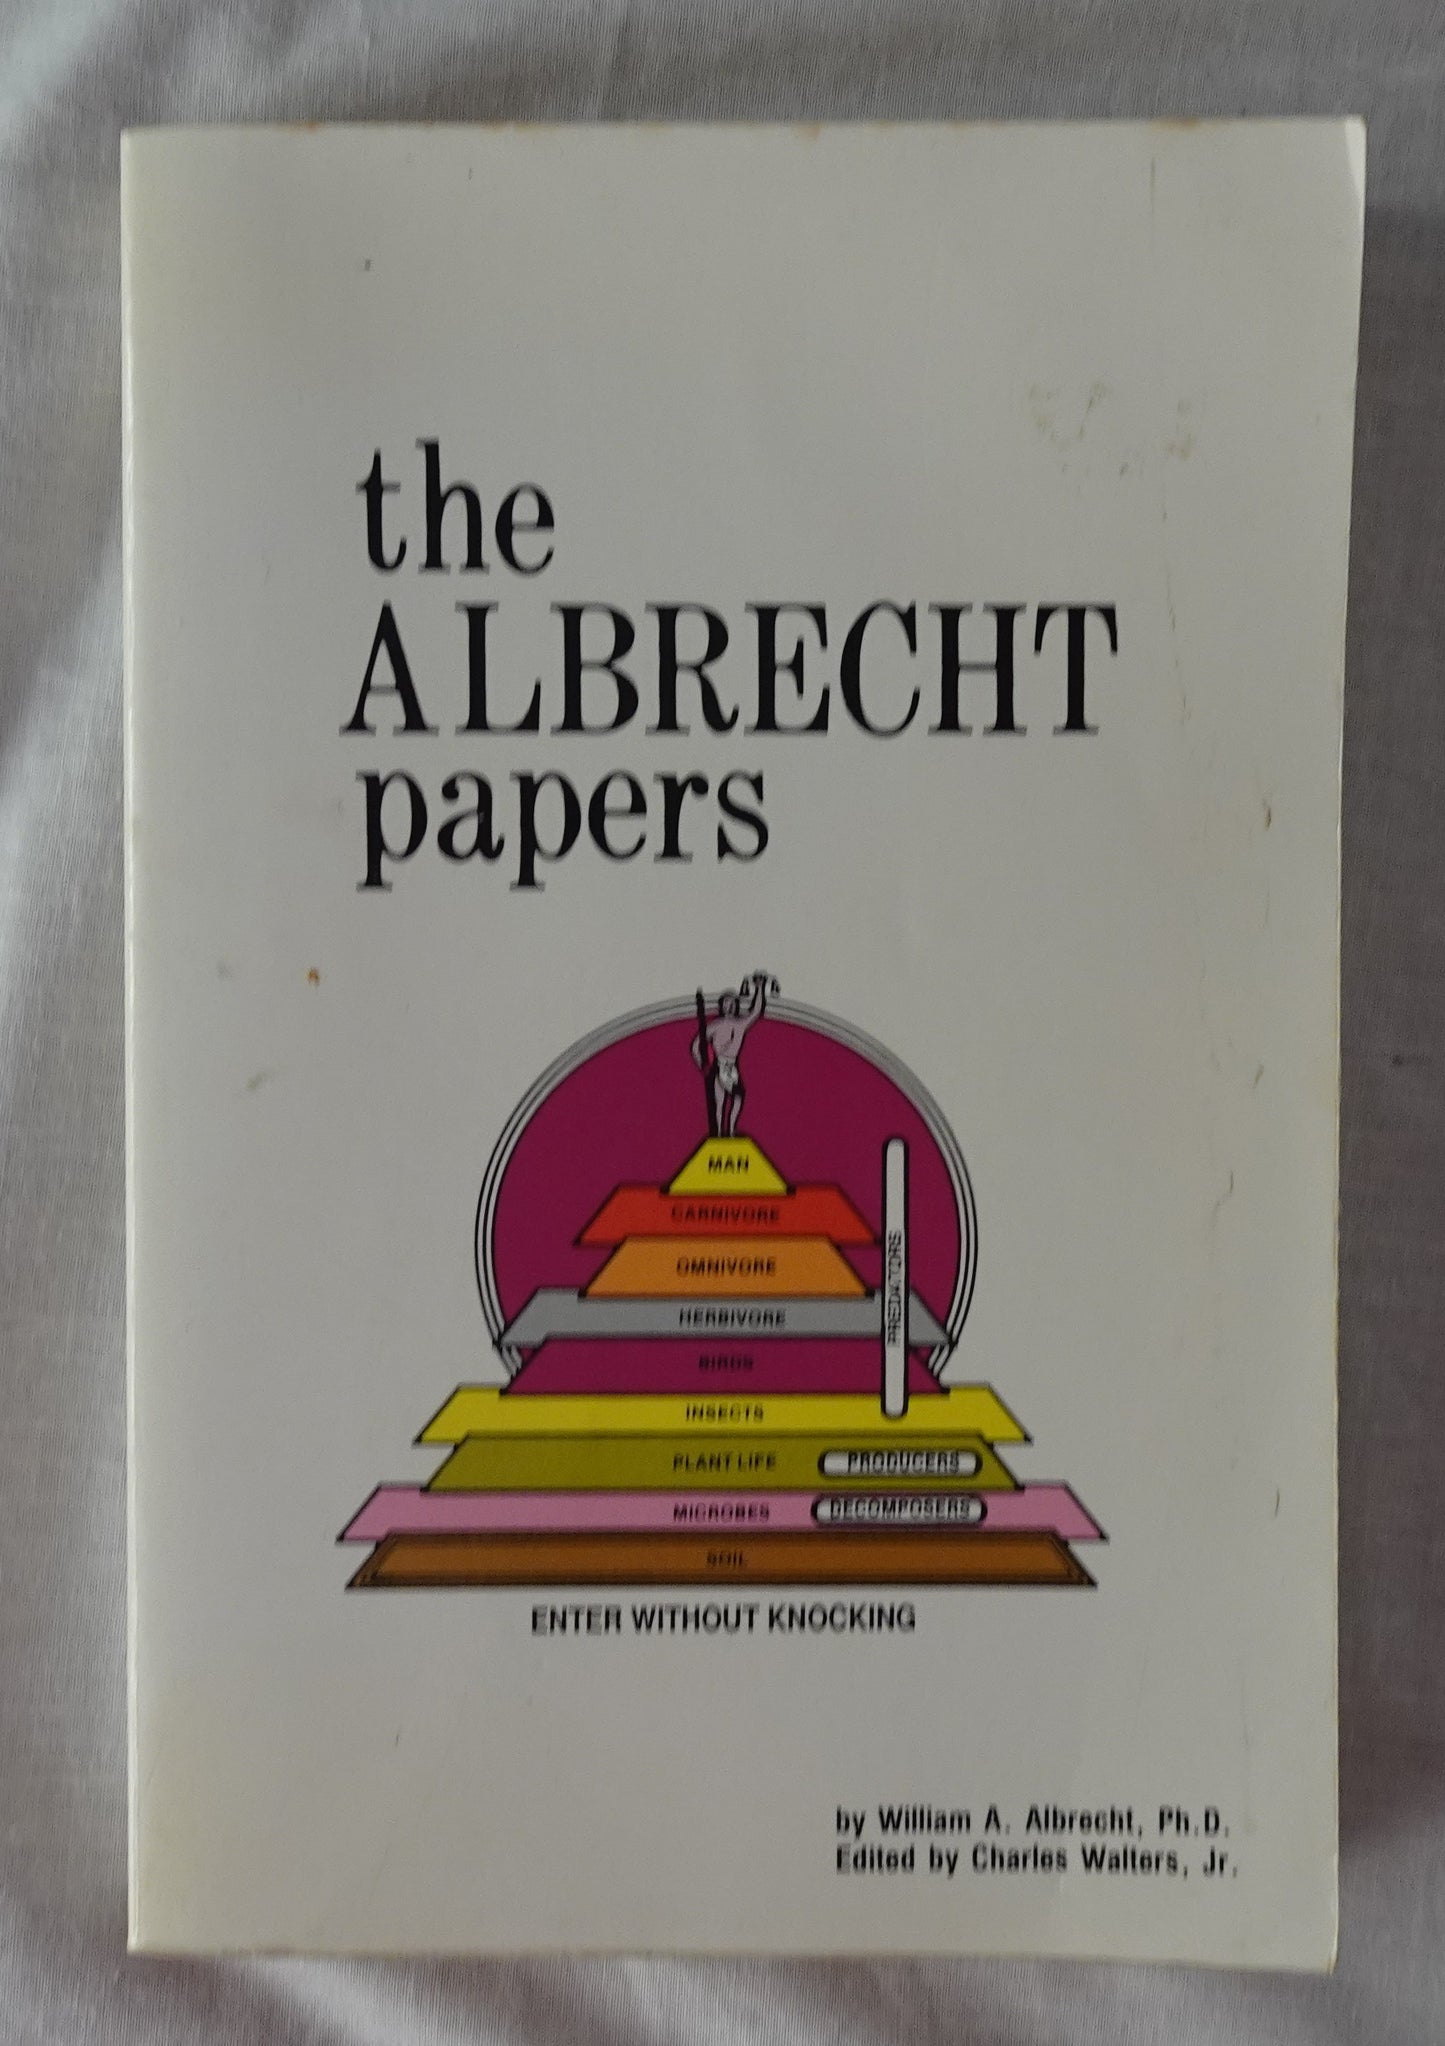 The Albrecht Papers  Enter Without Knocking  This is the fourth volume on the life and work of William A. Albrecht  by William A. Albrecht  edited by Charles Walters Jr.